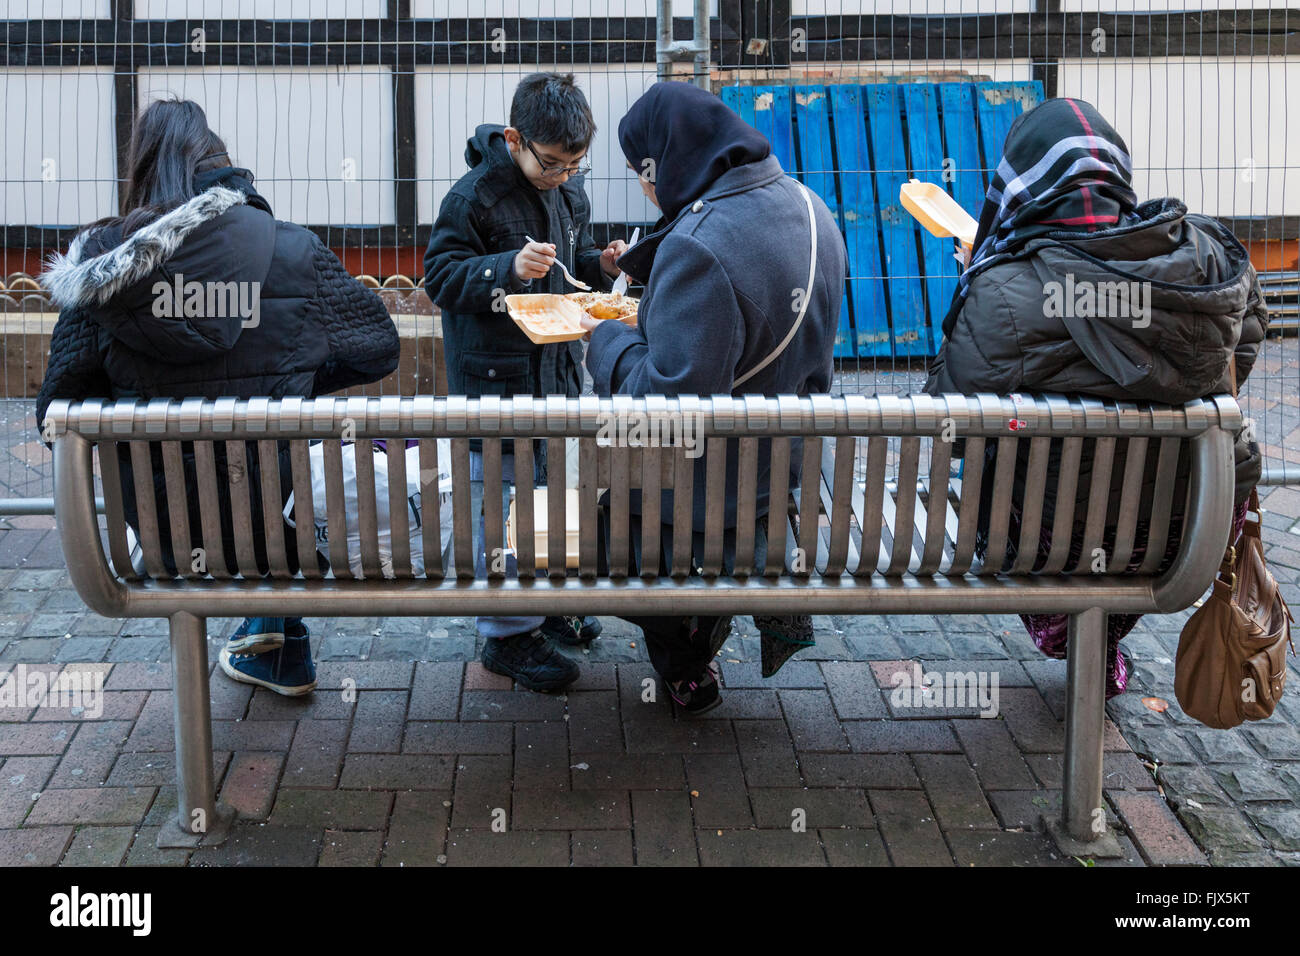 Family sitting on a bench eating take away food outside on a cold day in a city centre. Nottingham, England, UK Stock Photo